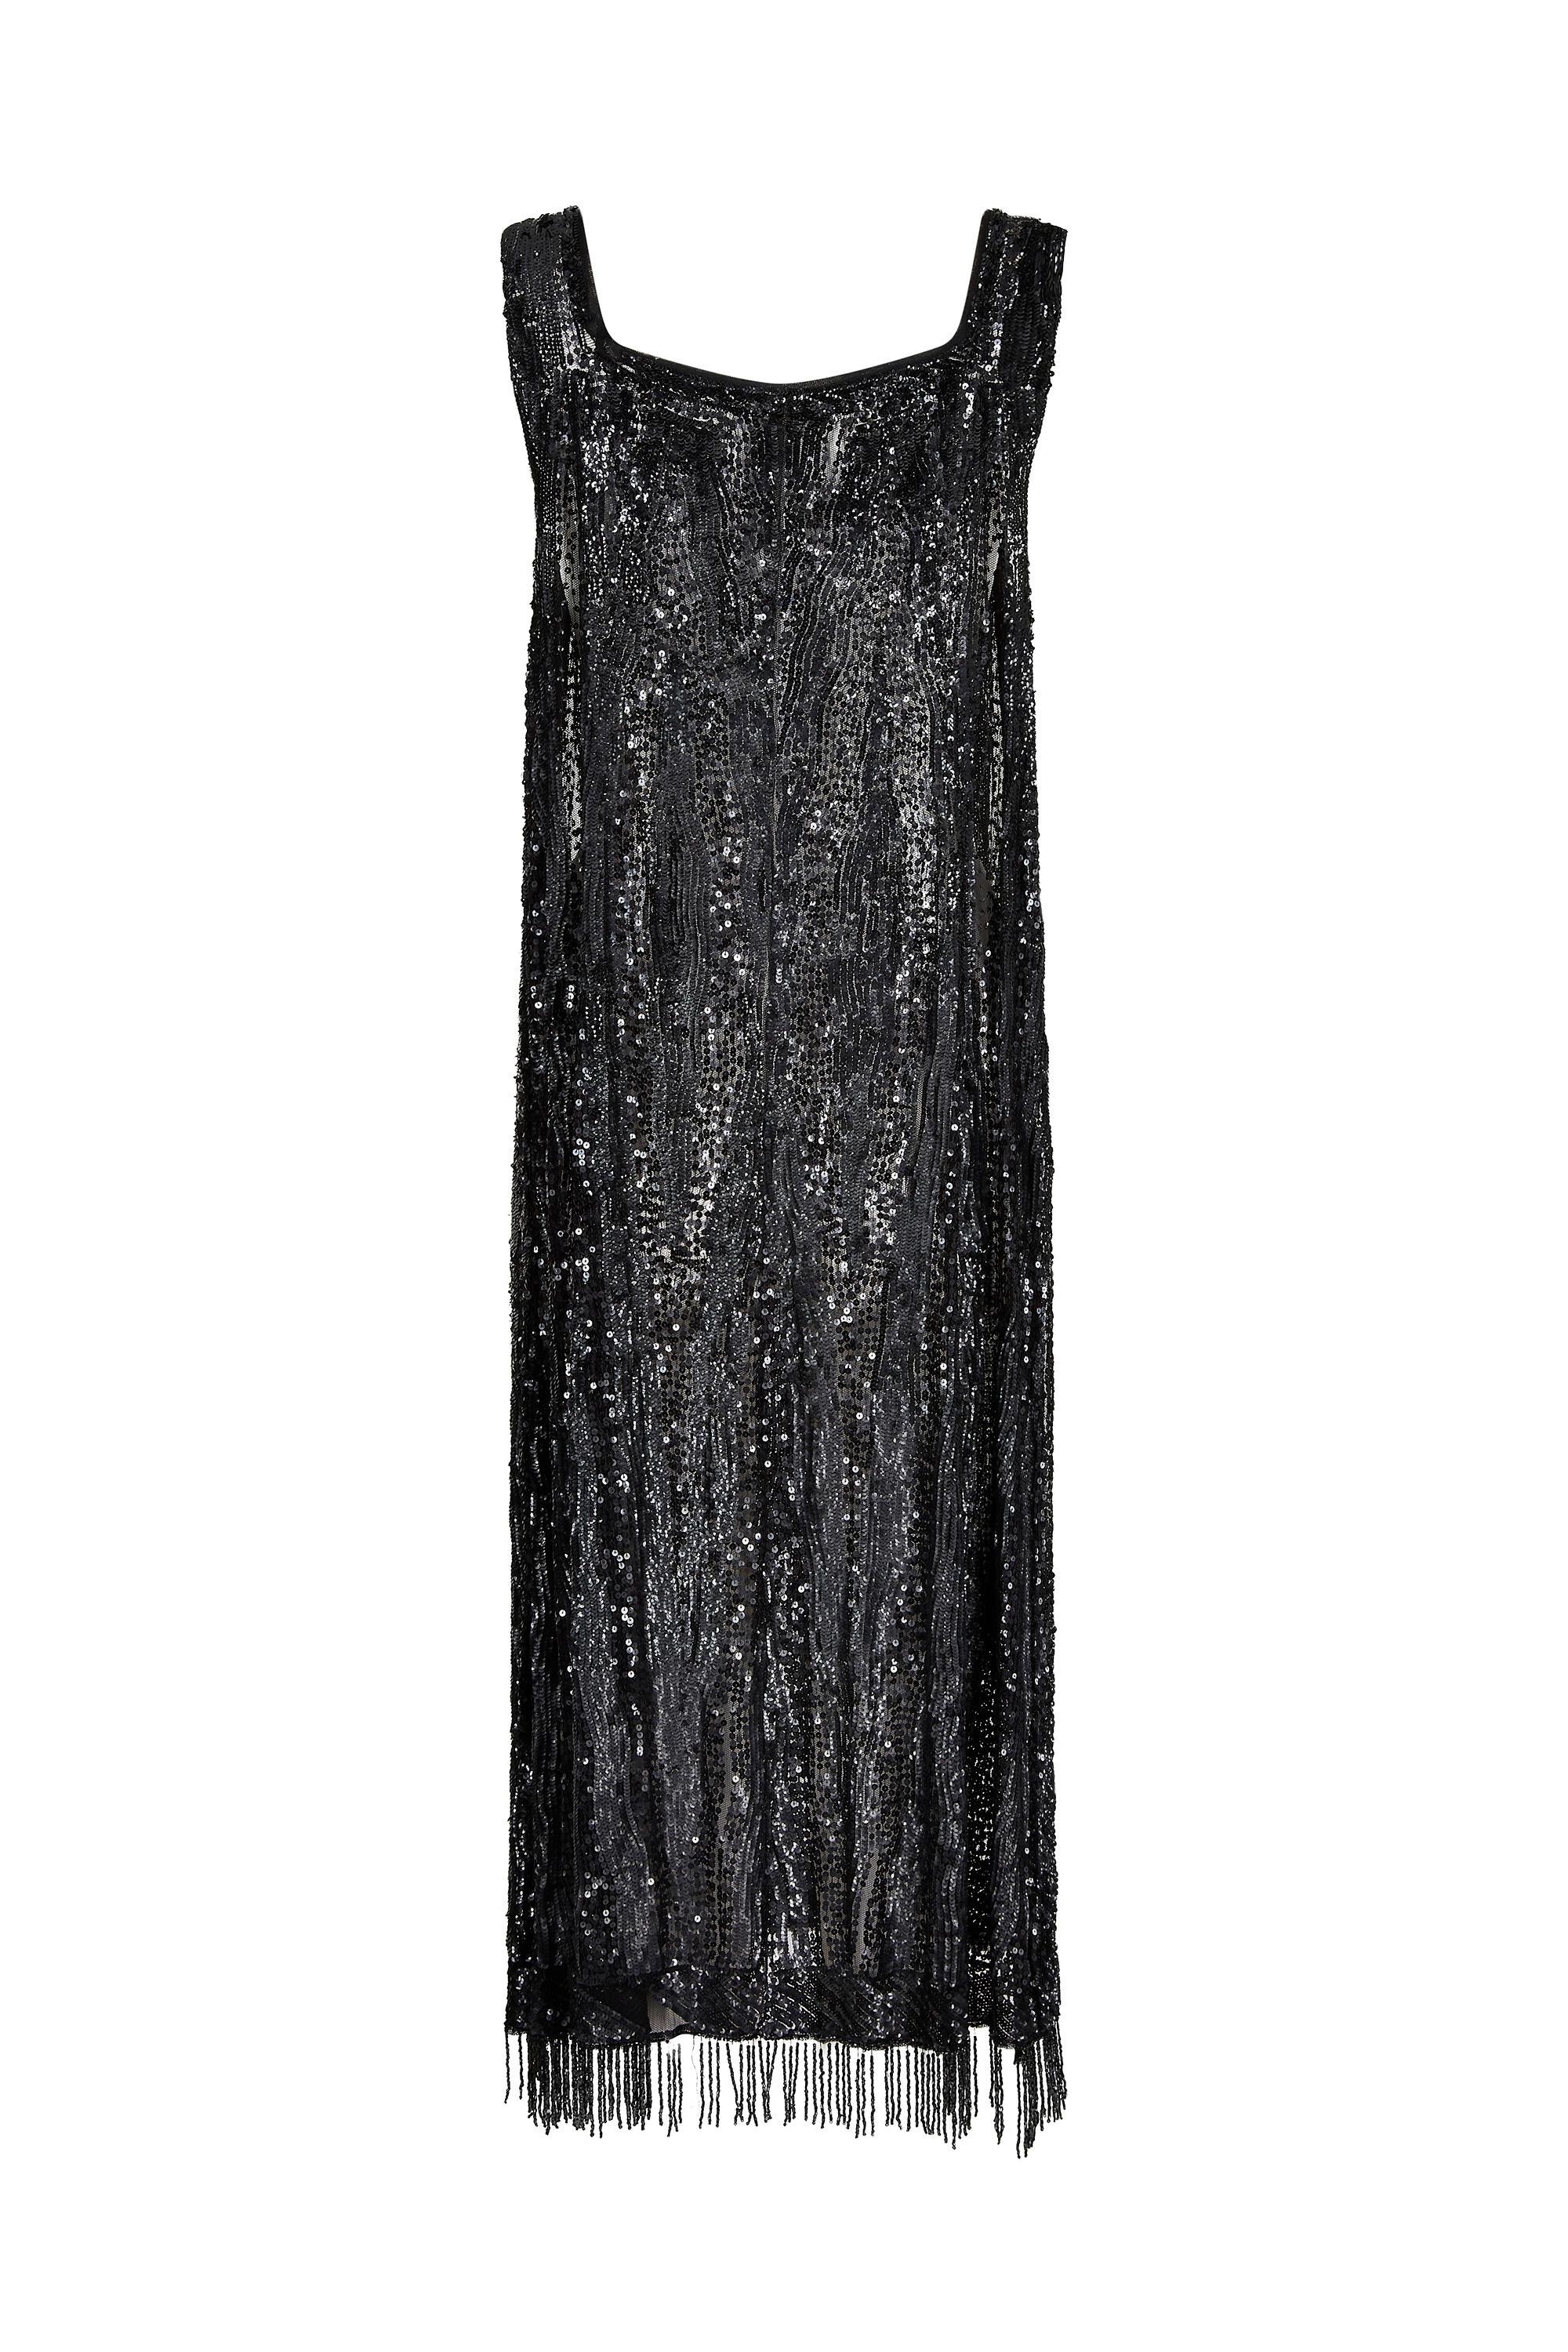 1920s Haute Couture Black Sequin Flapper Dress With Tassel Hemline In Excellent Condition For Sale In London, GB